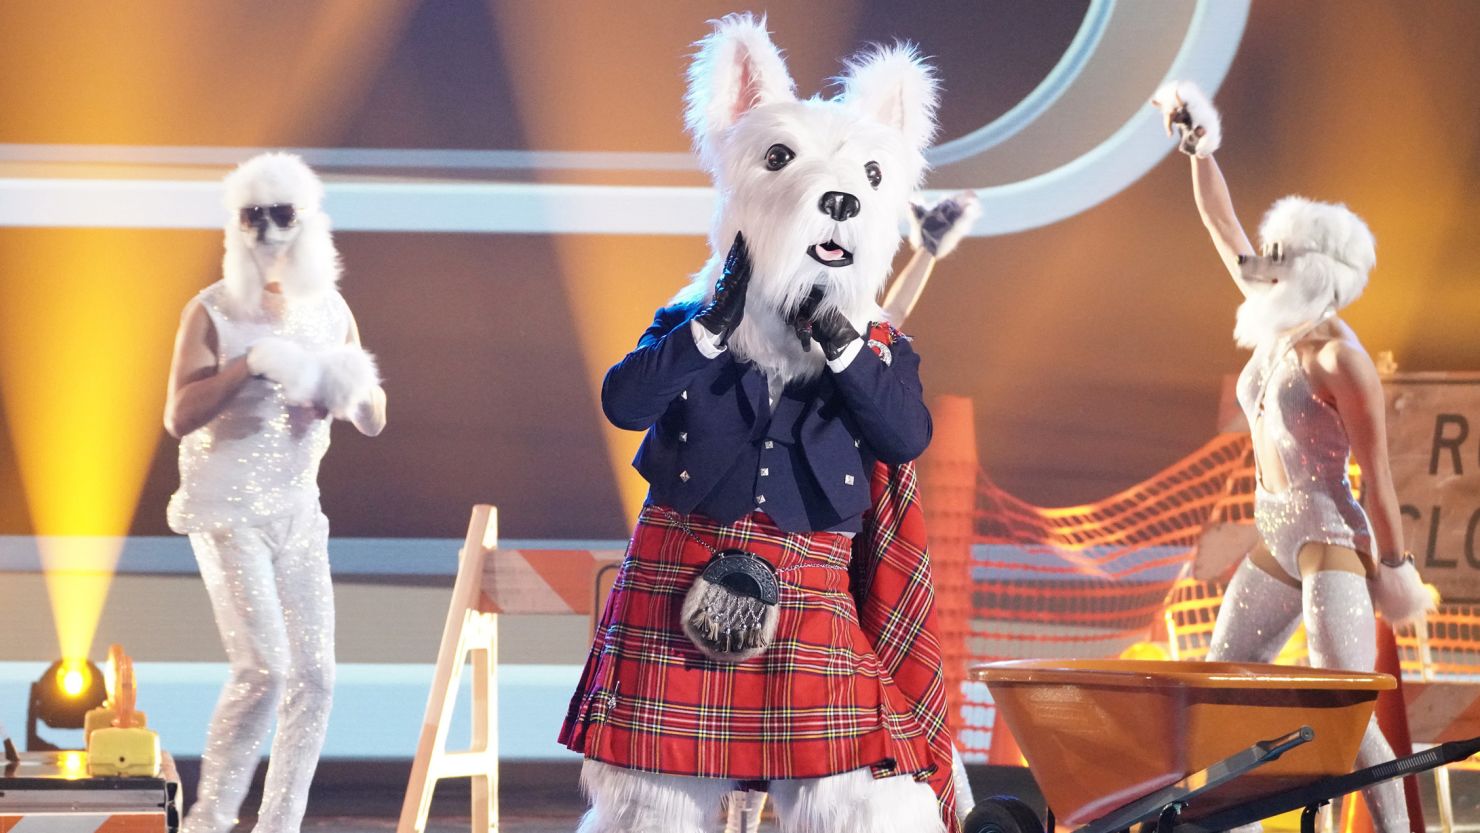 McTerrier in the premiere episode of The Masked Singer airing on March 9.